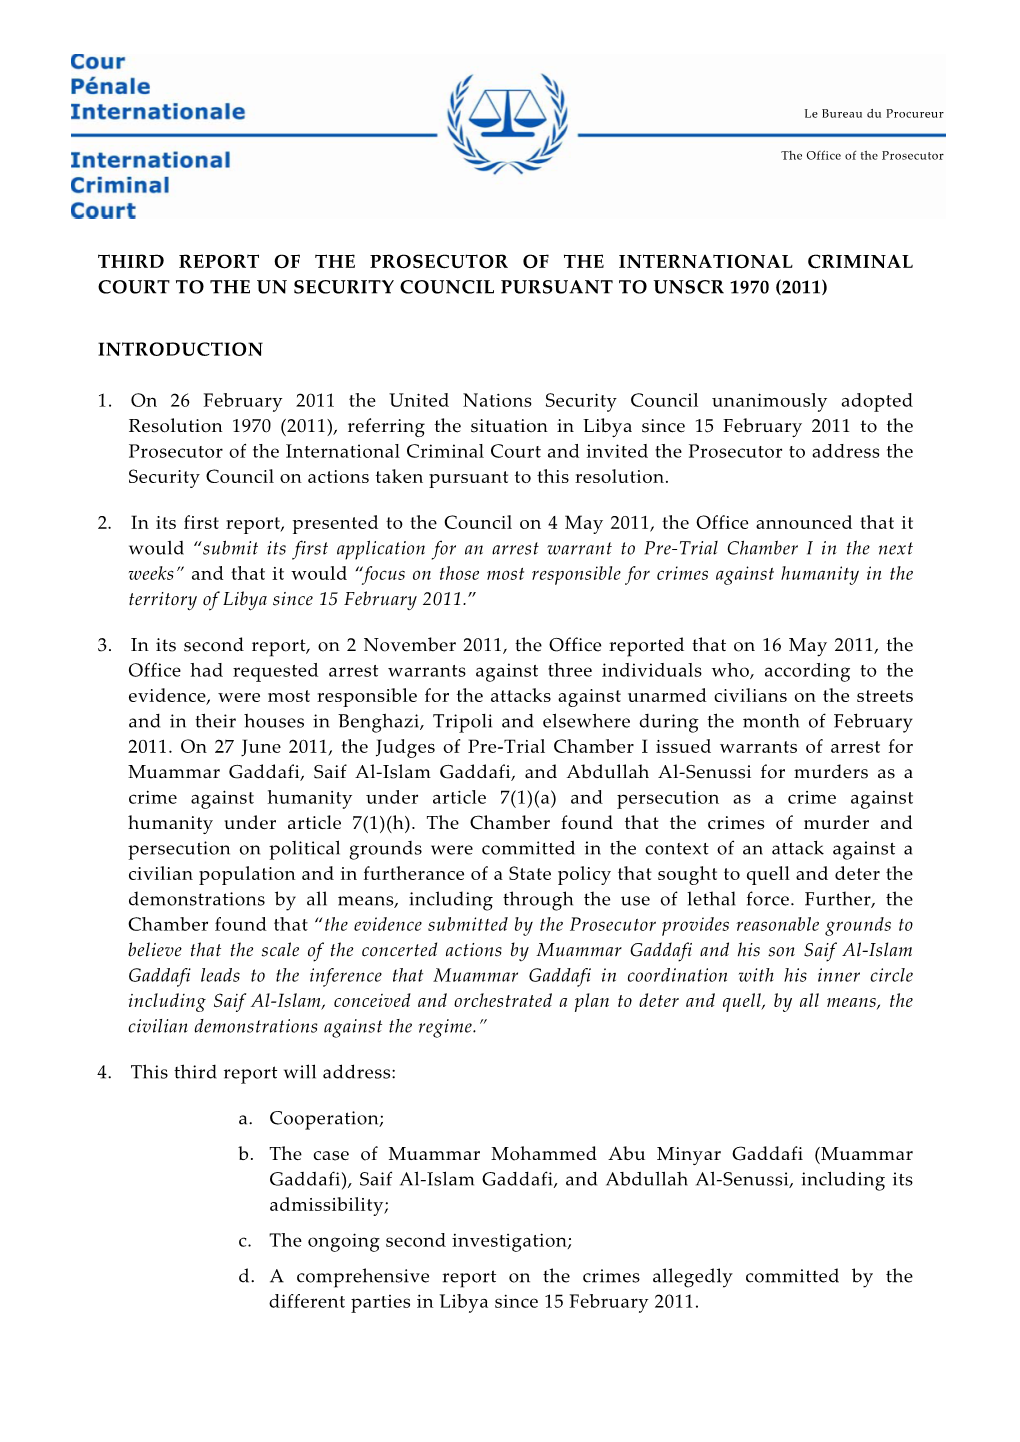 Third Report of the Prosecutor of the International Criminal Court to the Un Security Council Pursuant to Unscr 1970 (2011)